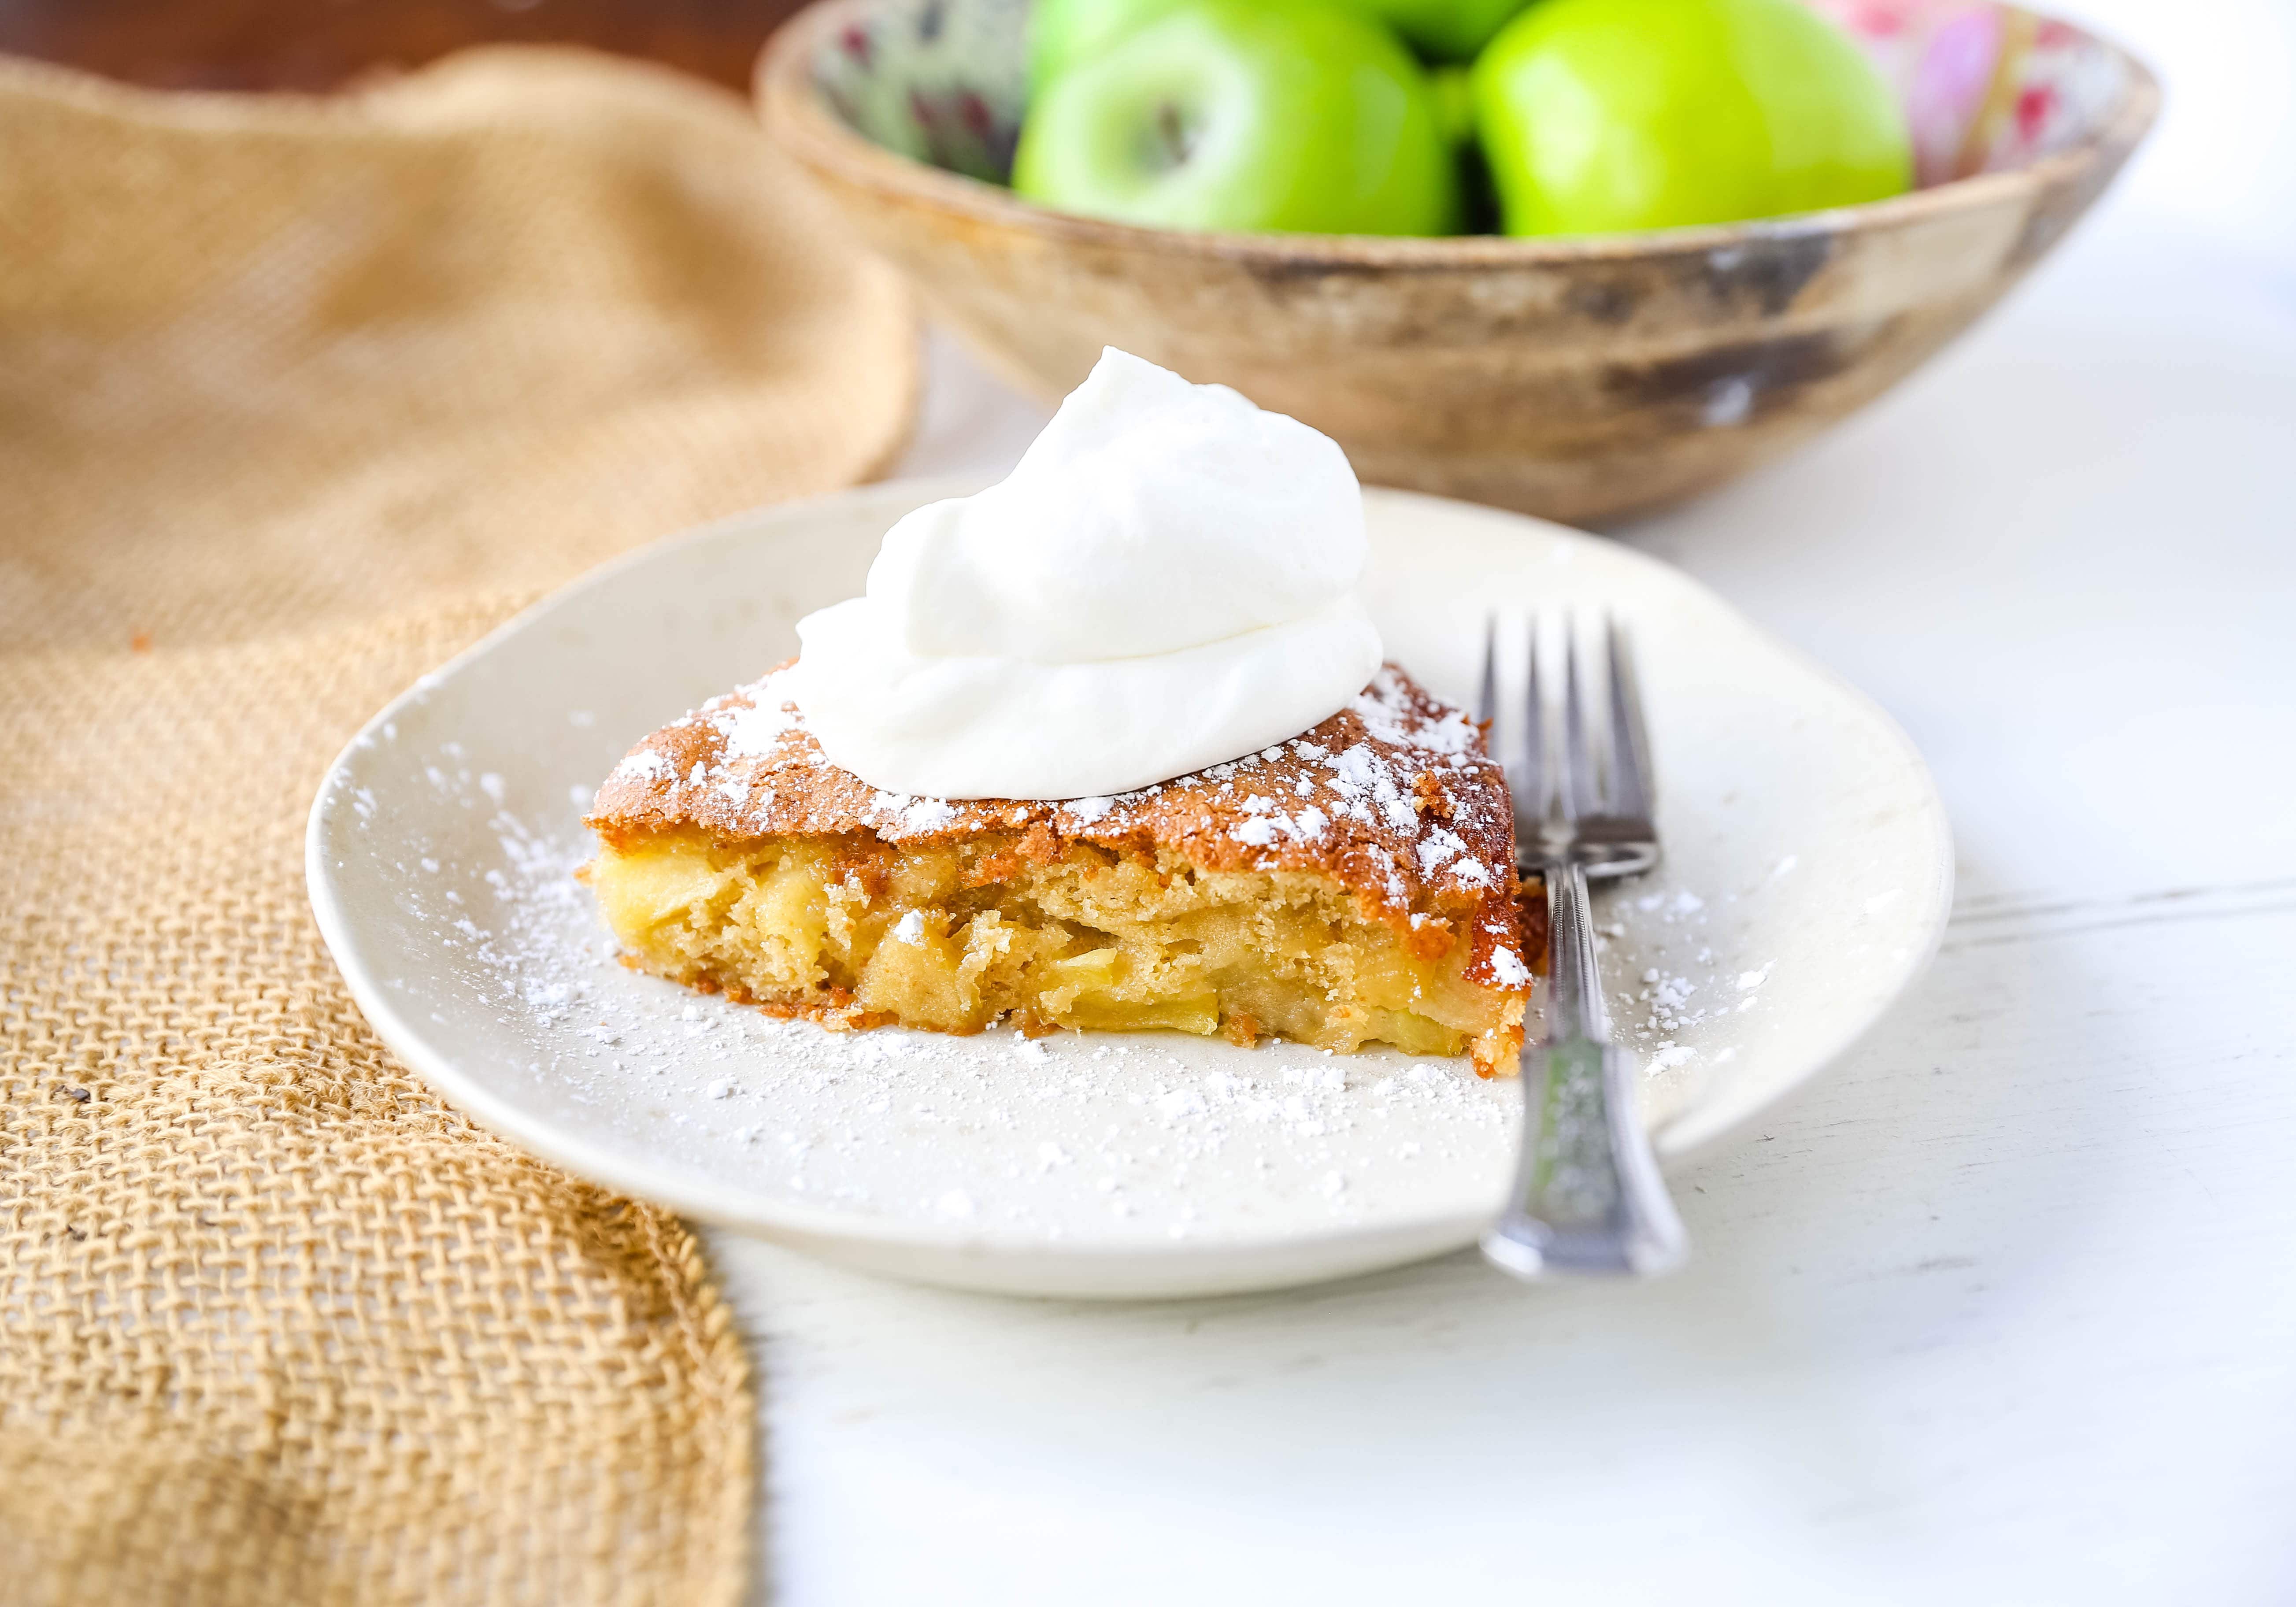 French Apple Cake A simple French buttery cake made with sweet apples and topped with freshly whipped cream. www.modernhoney.com #frenchapplecake #applecake #frenchcake #dessert #appledessert